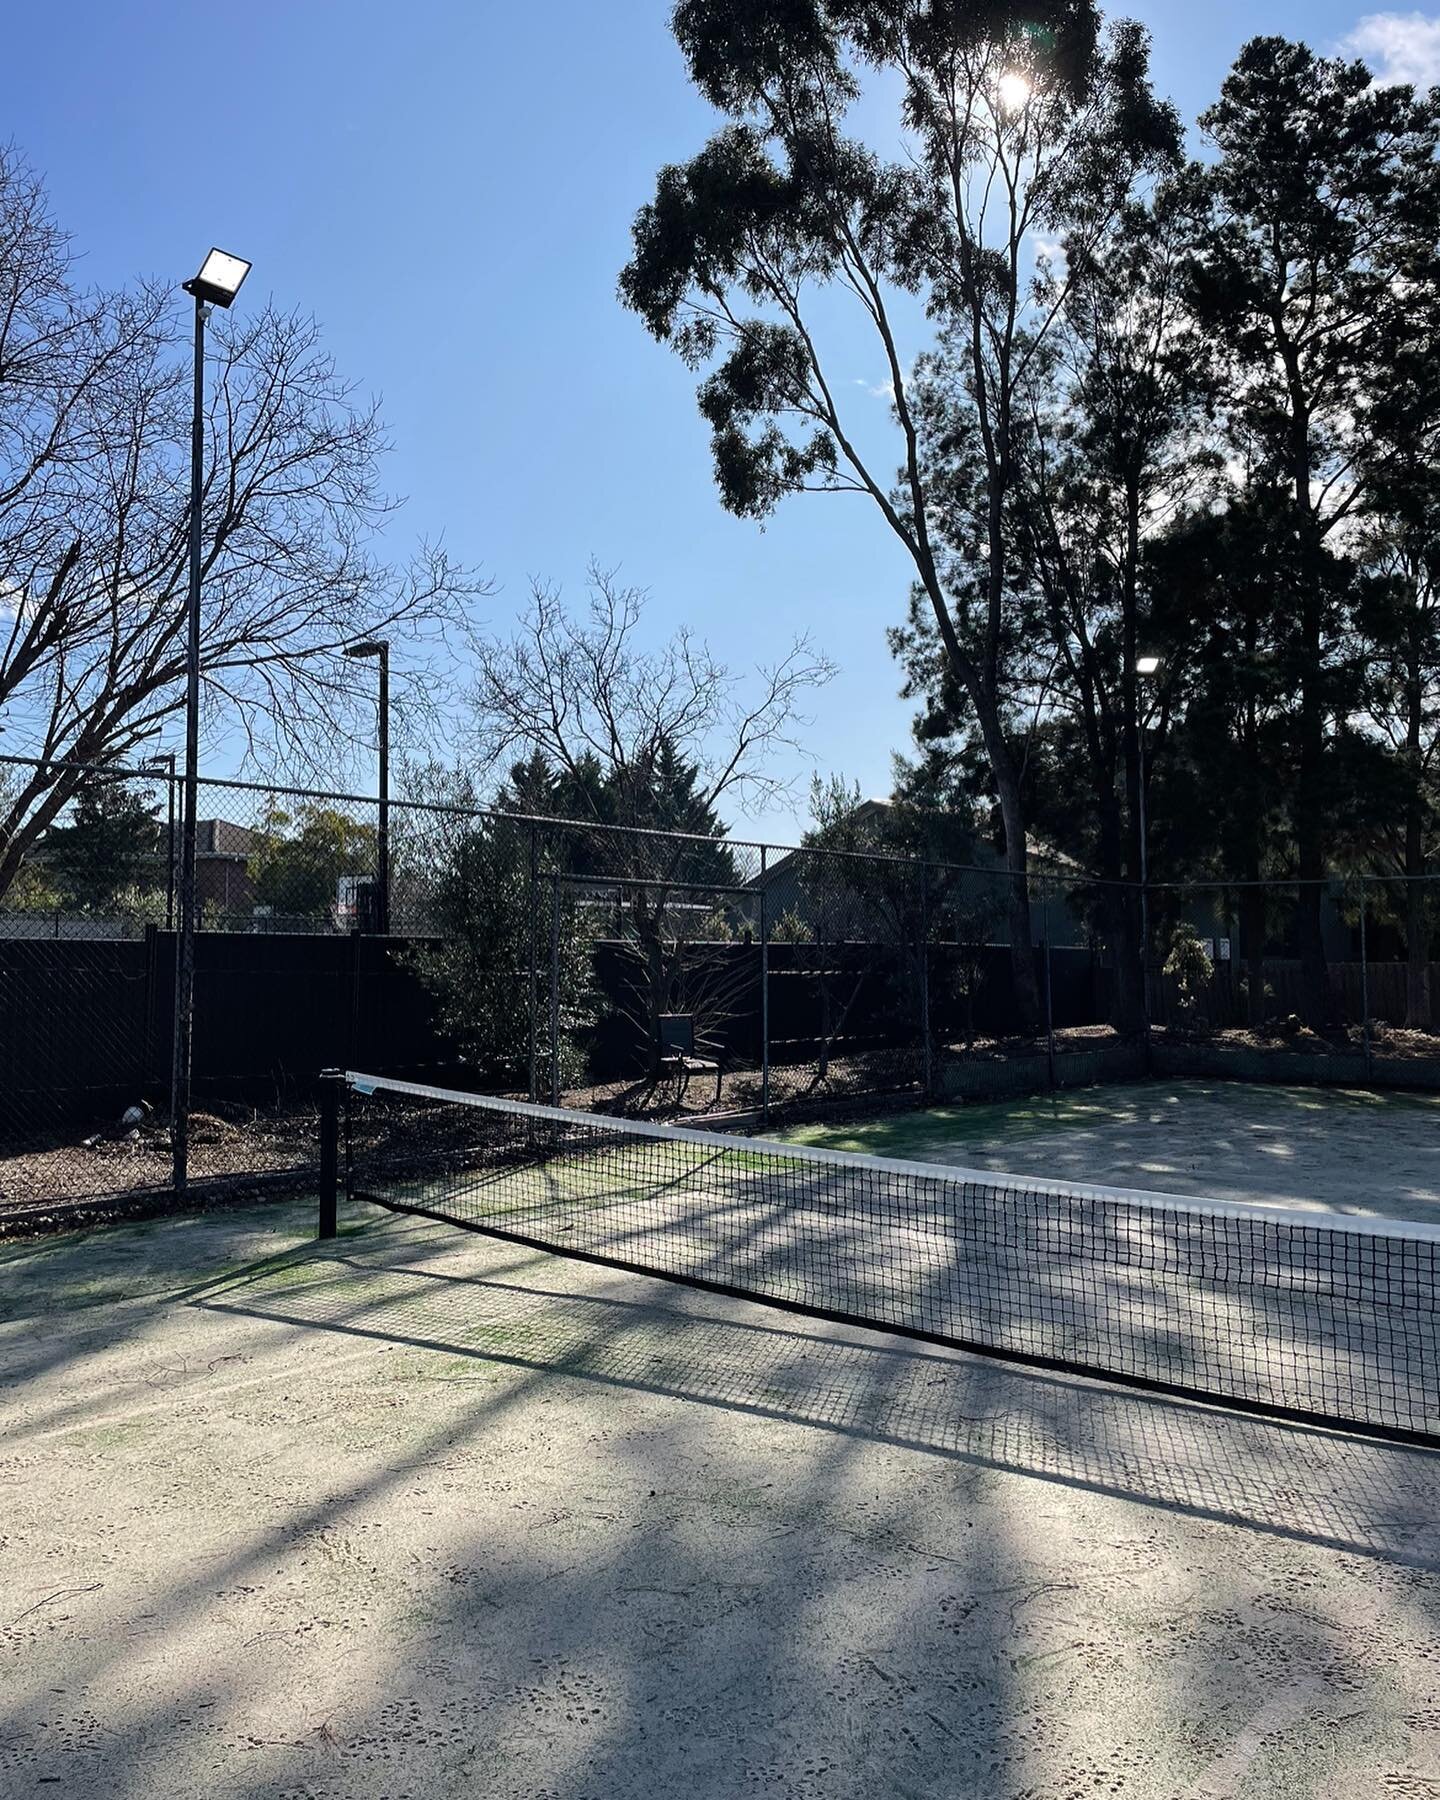 Tennis court light upgrade.

Damaged cable repaired &amp; metal halide lamp flood lights replaced with new 200w floods.